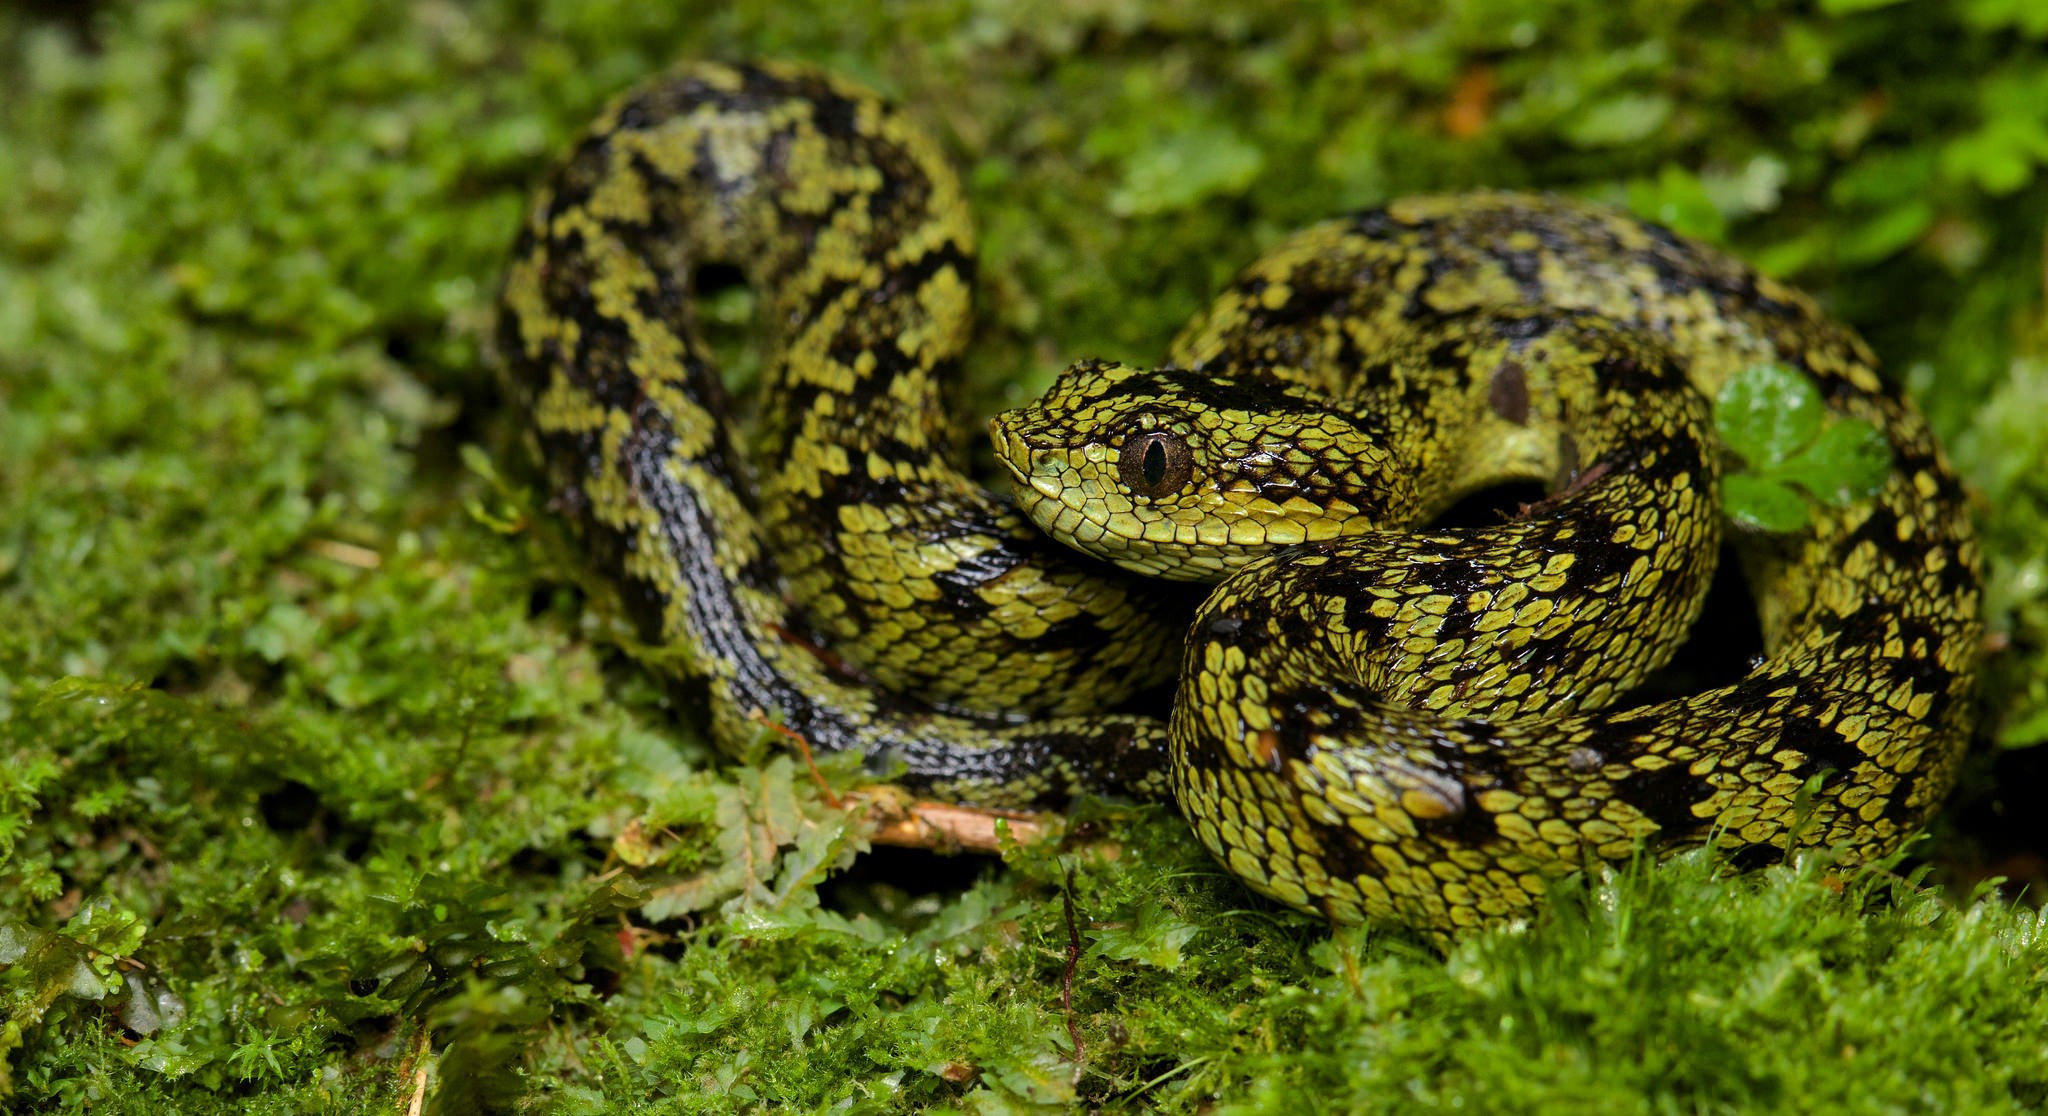 General 2048x1116 animals snake reptiles